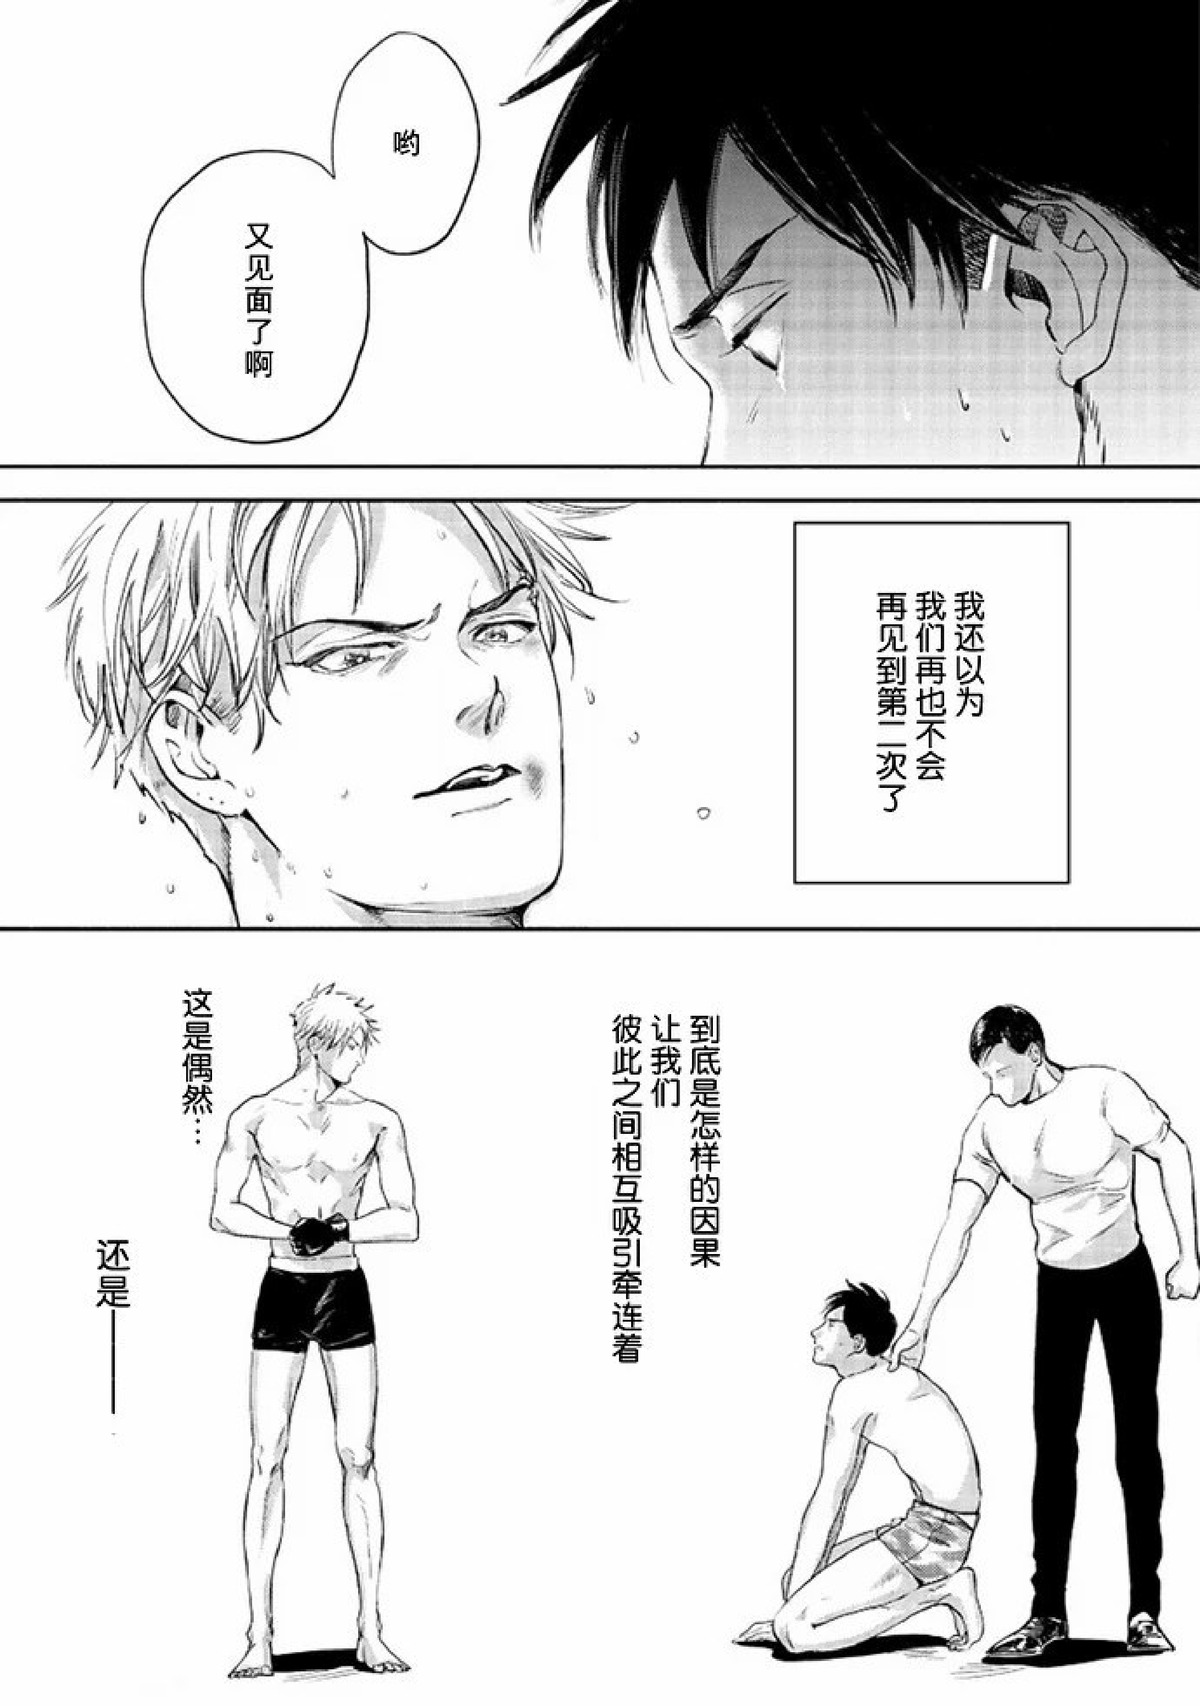 【Two sides of the same coin[耽美]】漫画-（上卷01-02）章节漫画下拉式图片-56.jpg